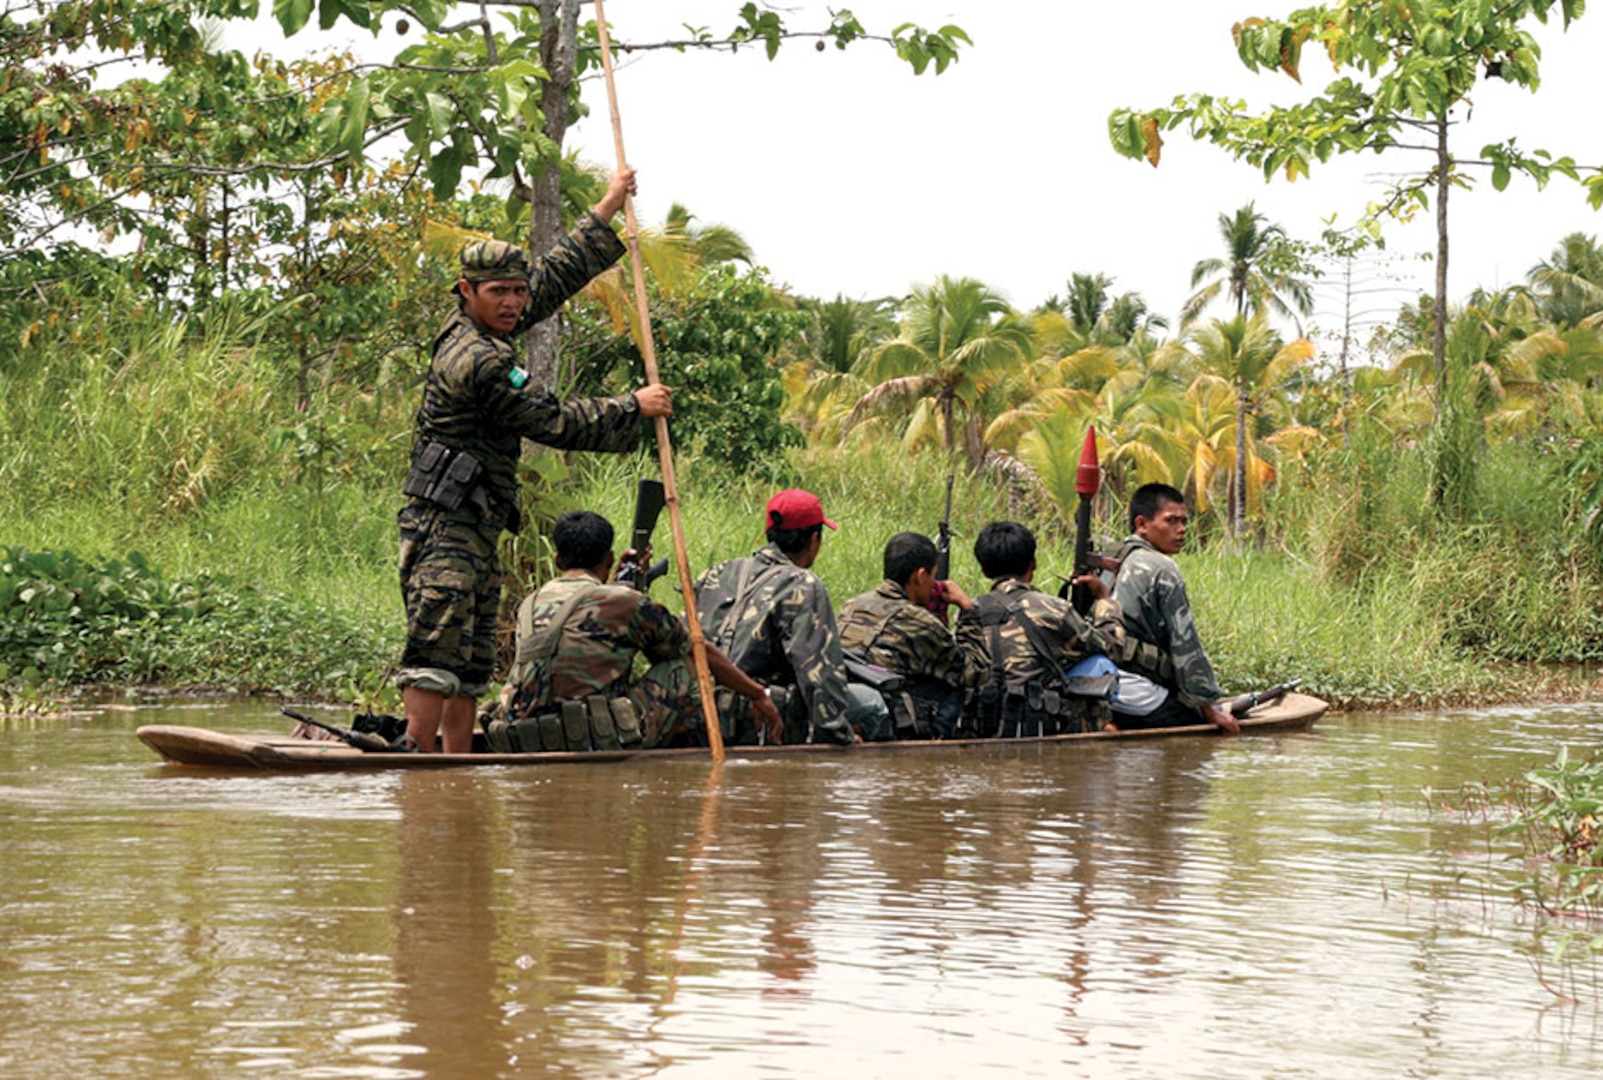 Moro Islamic Liberation Front members travel down a river in Maguindanao, Philippines.